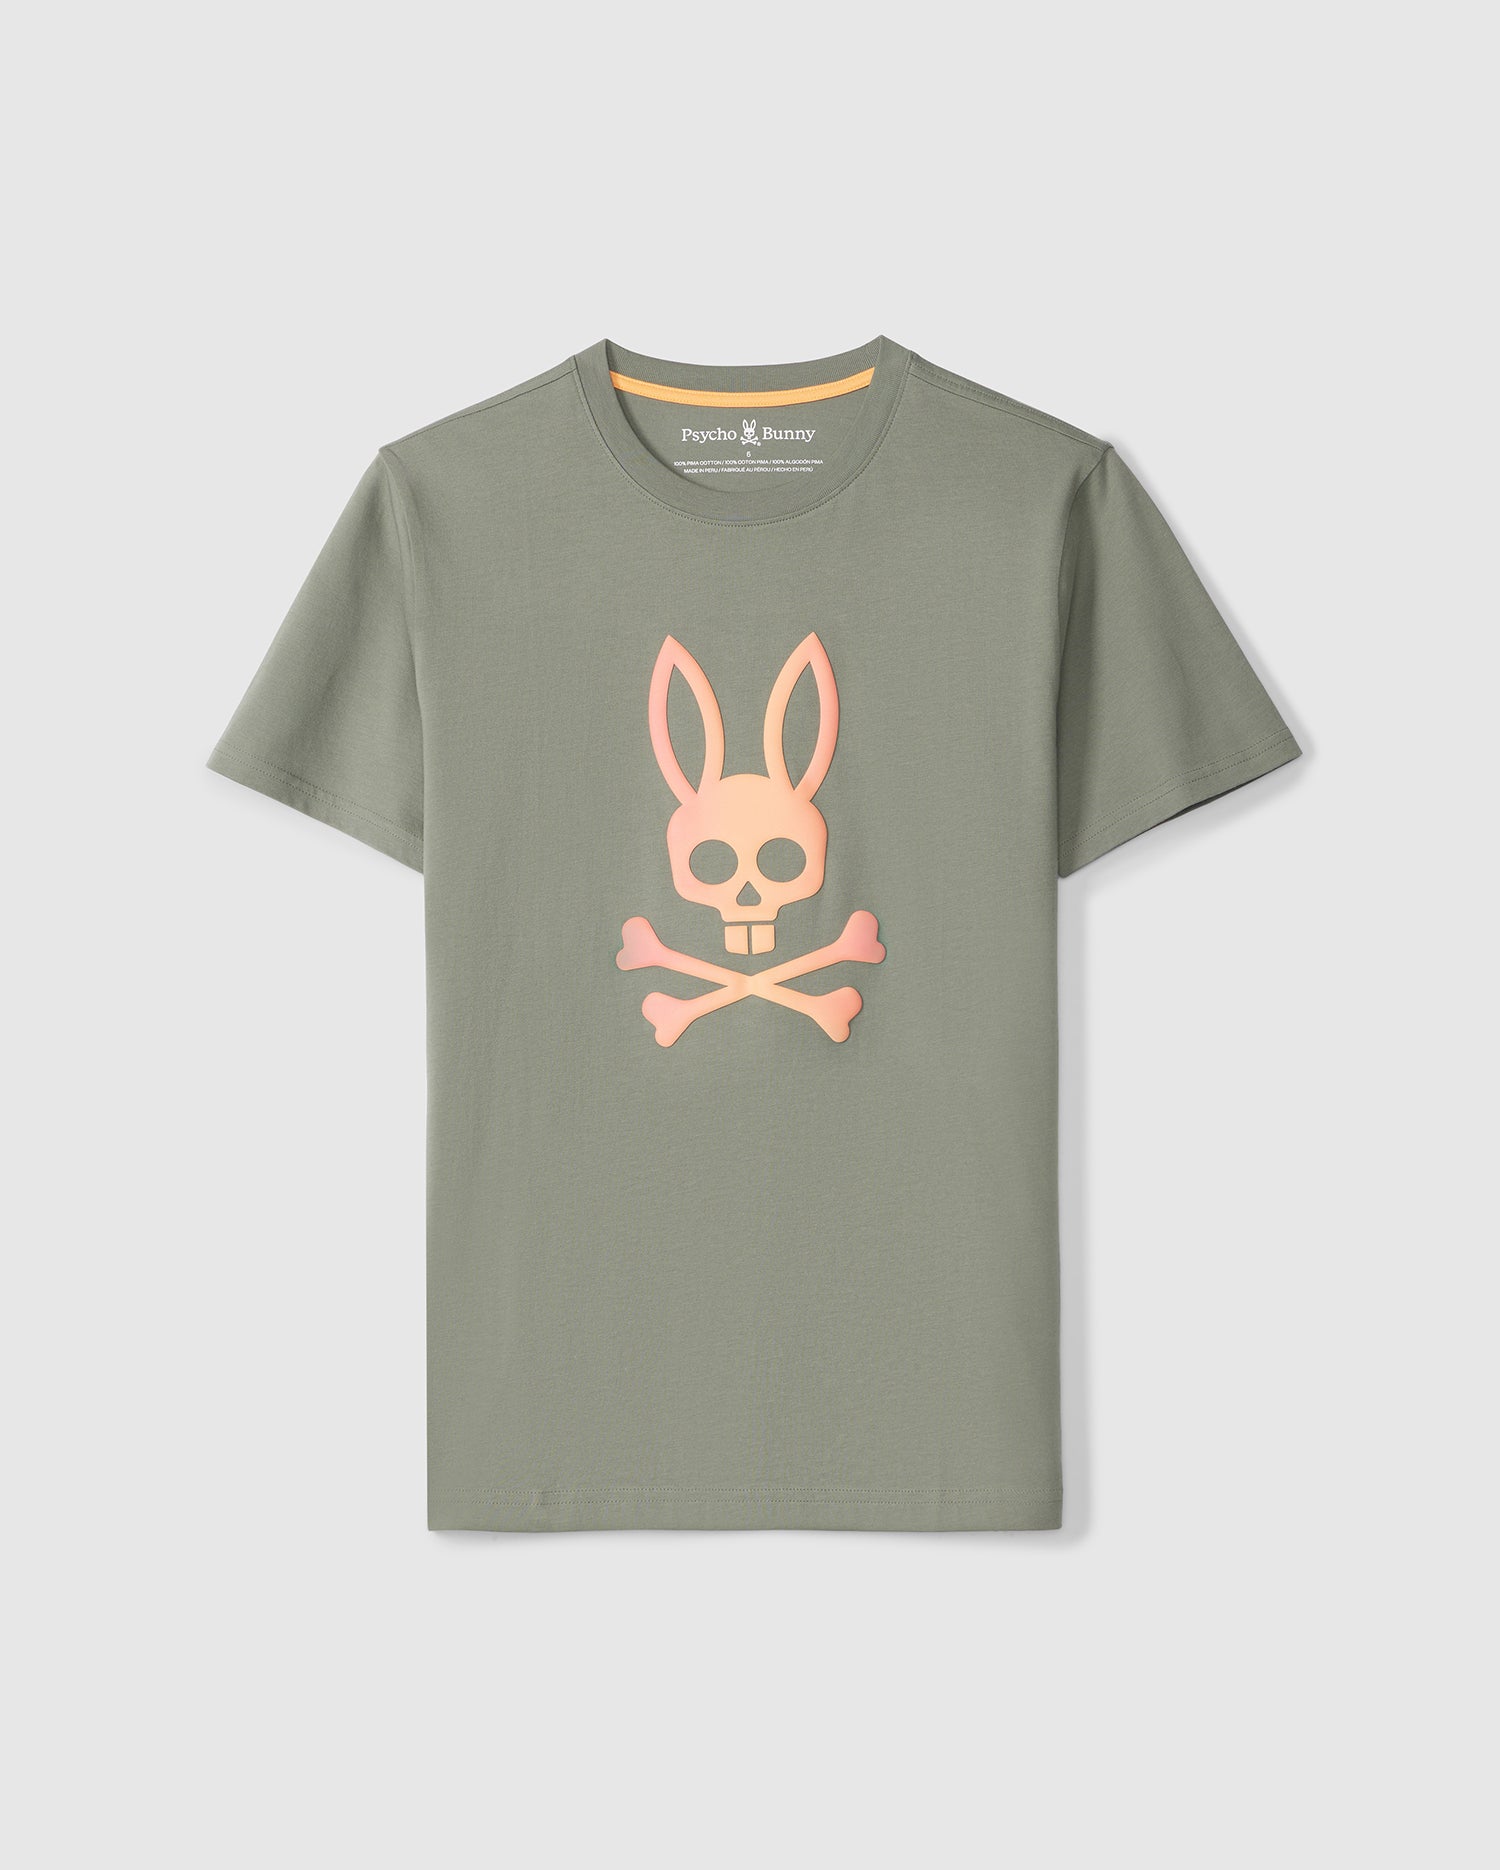 A short-sleeved, olive-green graphic tee featuring a pink, HD-printed Bunny with crossbones on the front. Crafted from luxurious Peruvian Pima cotton, the brand 